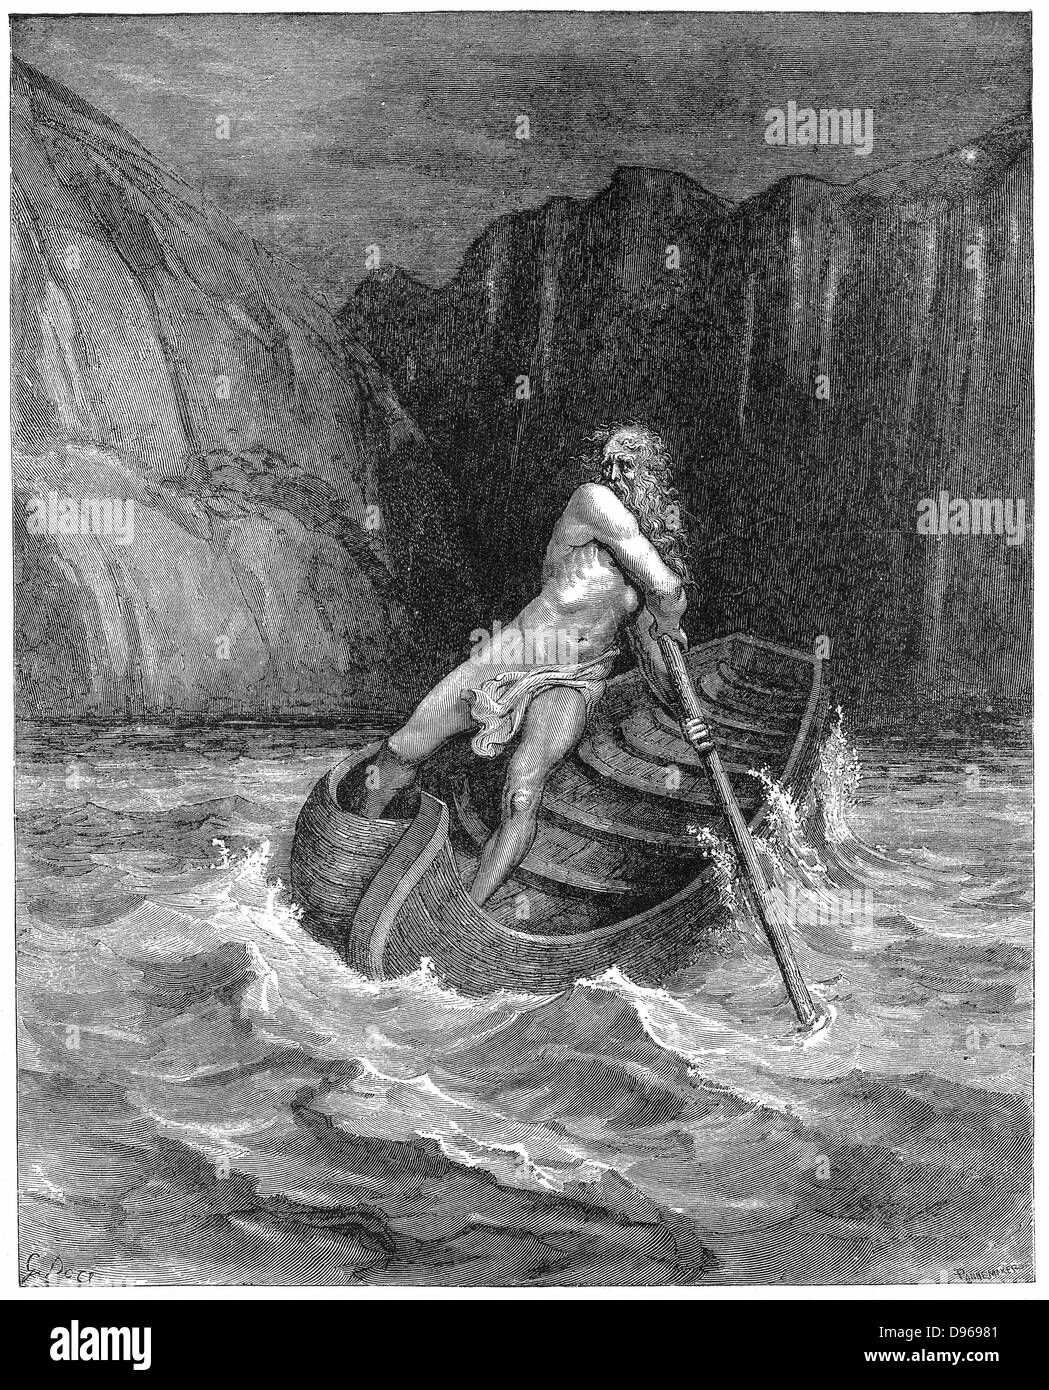 Charon the ferryman rowing to collect Dante and his guide, Virgil, to carry them across the Styx. Illustration by Gustave Dore for Dante 'Inferno', Canto III. Wood engraving 1861. Stock Photo